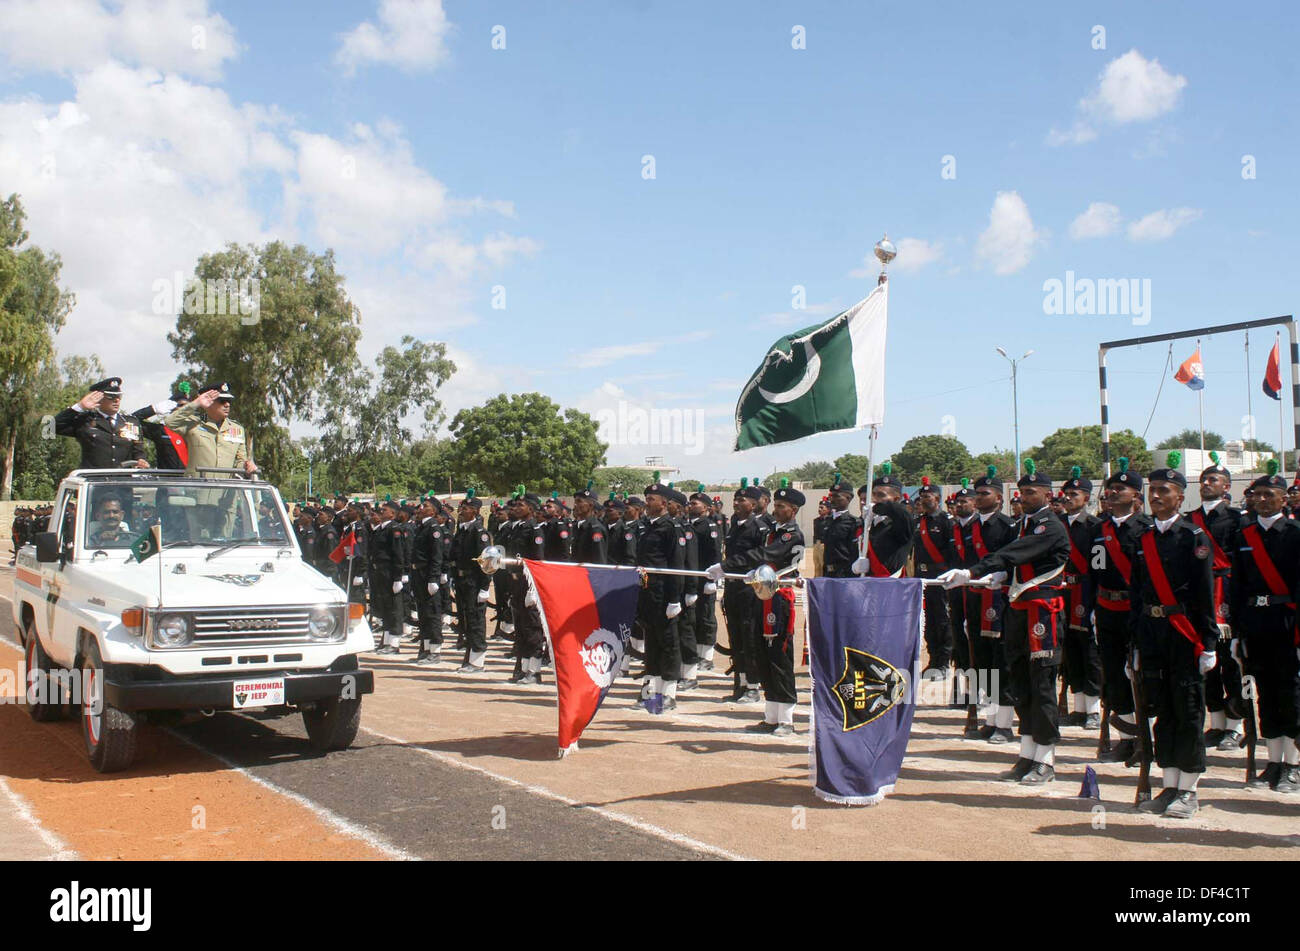 Police Inspector General of Police, Shahid Nadeem Baloch reviewing passing out parade of 28th-29th Elite Forces batch of Police at Razzaqabad Police Training Center of Karachi on Friday, September 27, 2013 Stock Photo